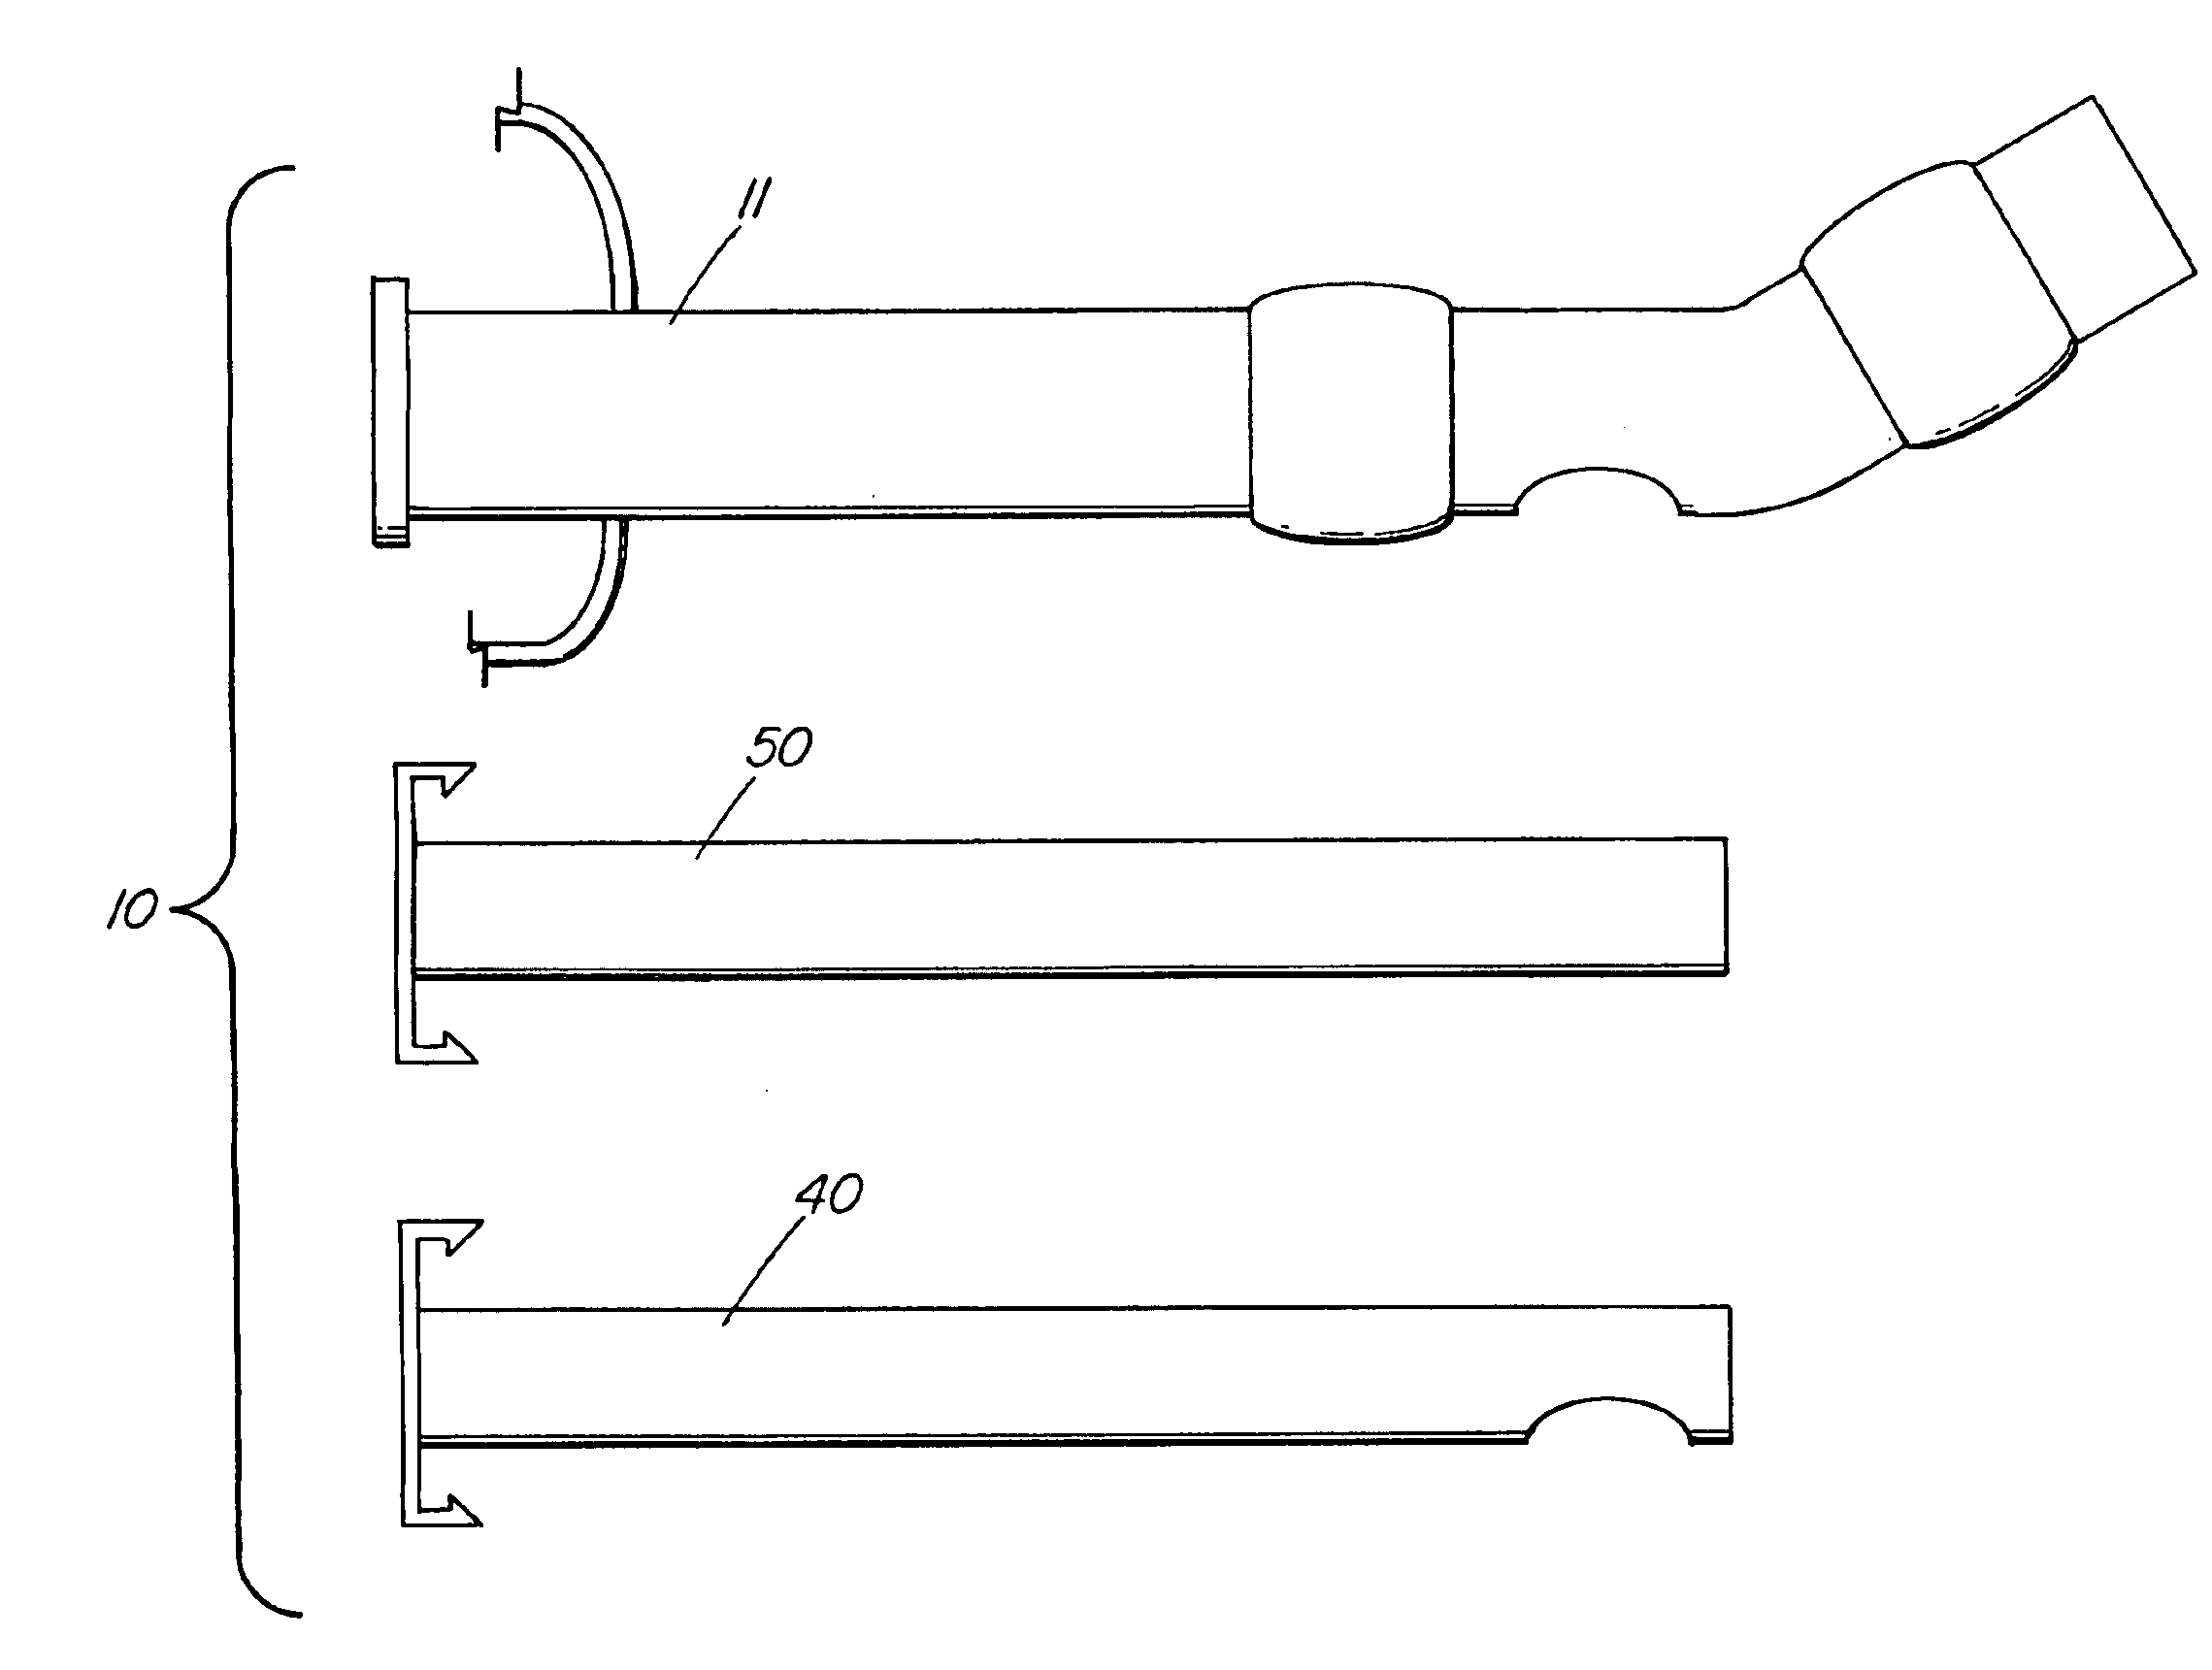 Medical devices and methods of selectively and alternately isolating bronchi or lungs